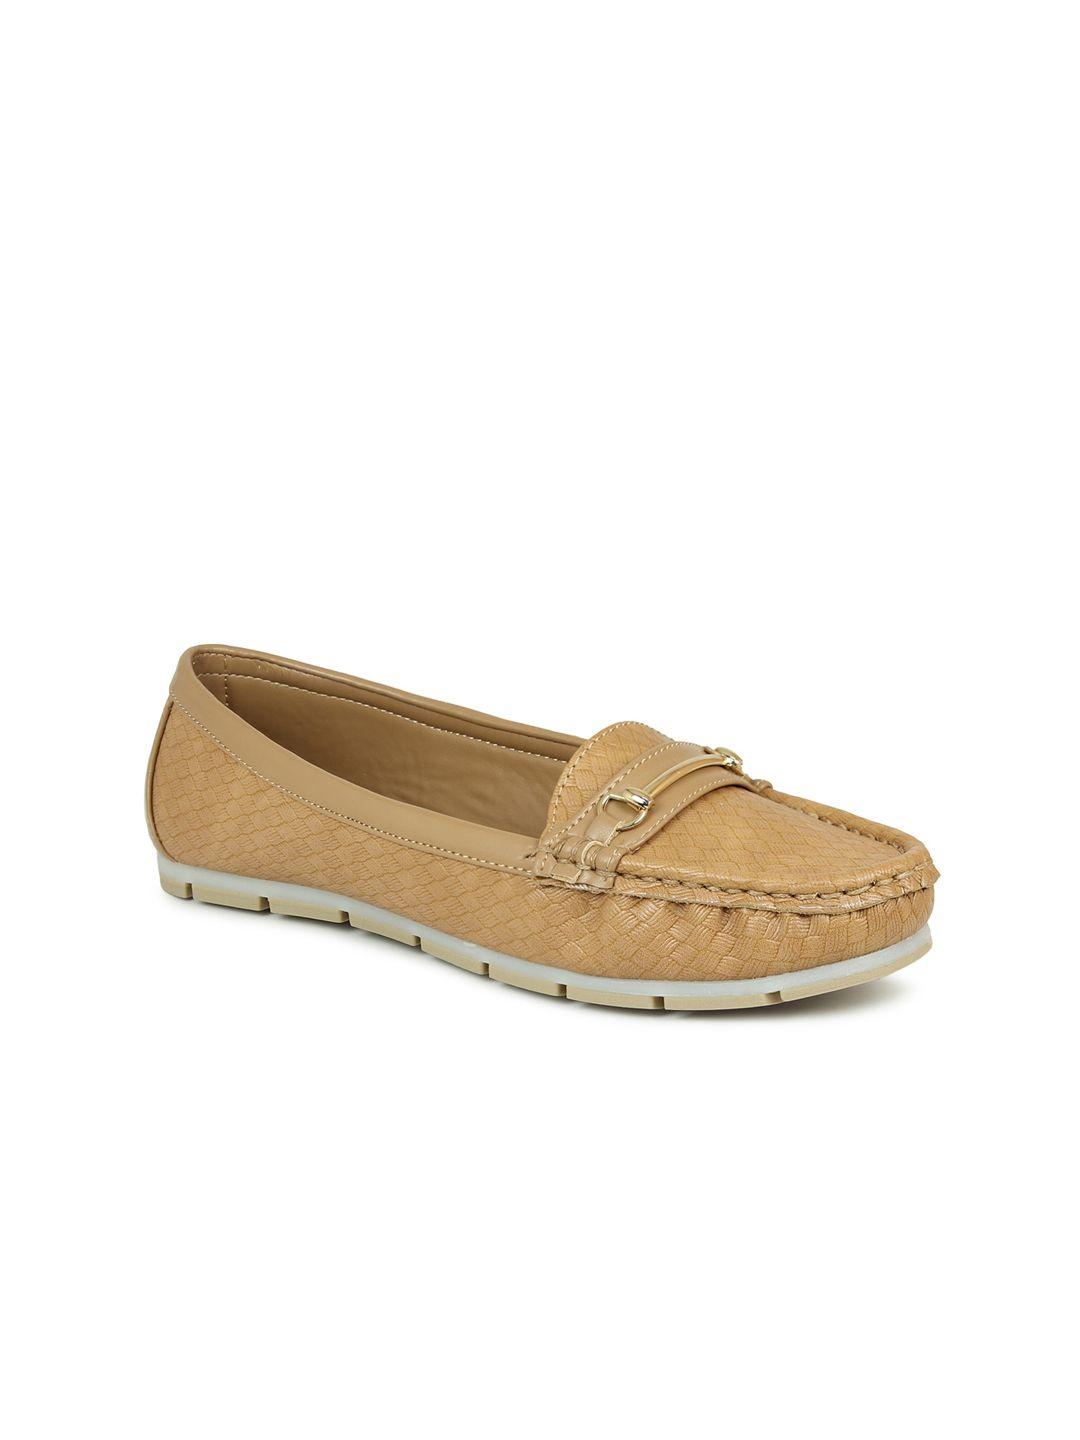 inc 5 women solid loafers